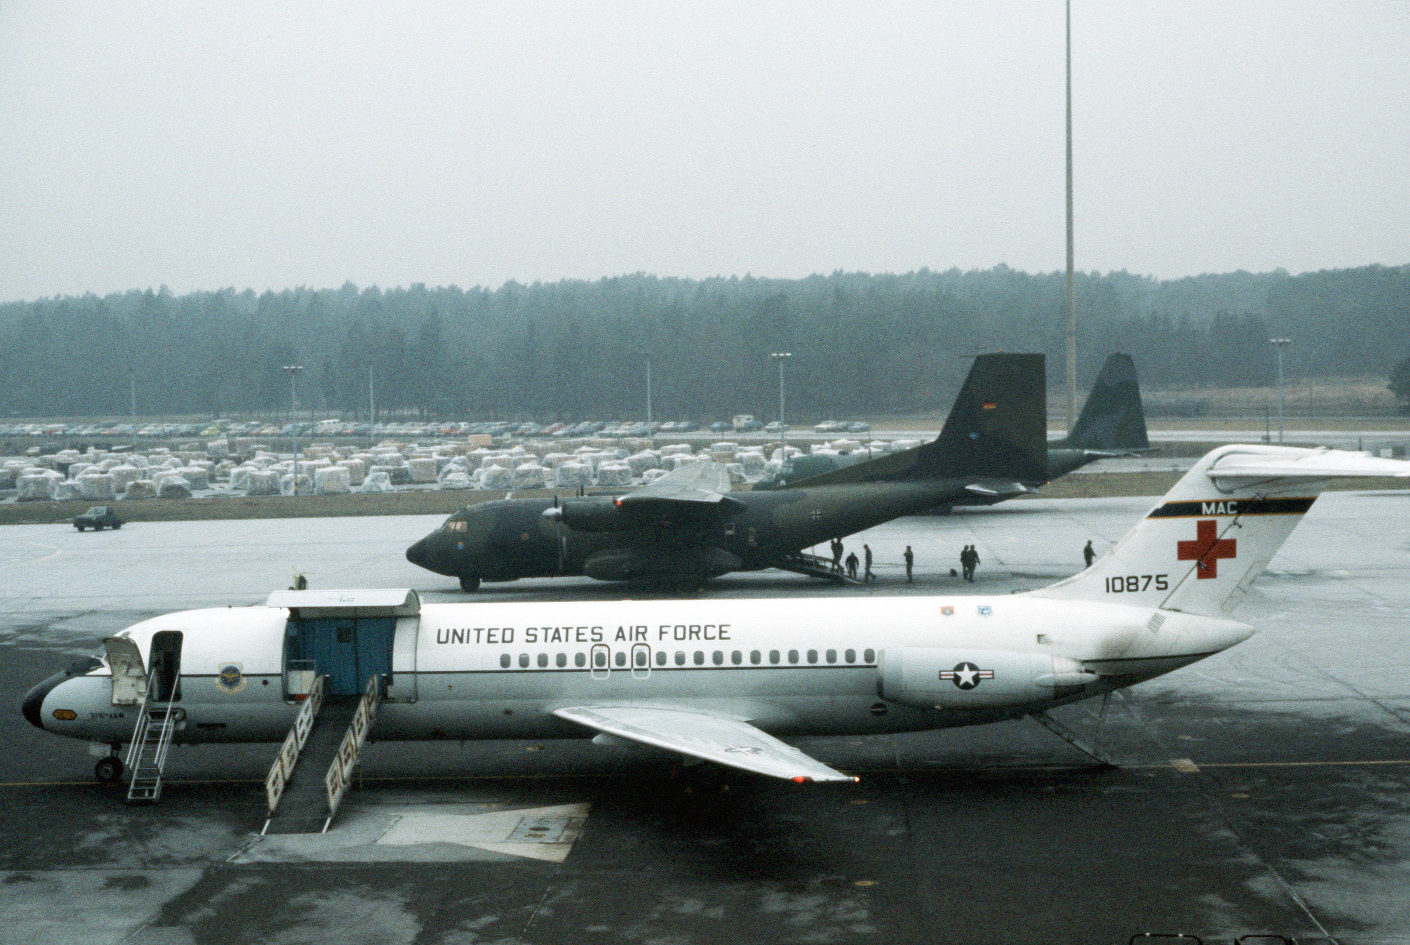 C-9A Nightingale of 375th Aeromedical Airlift Wing